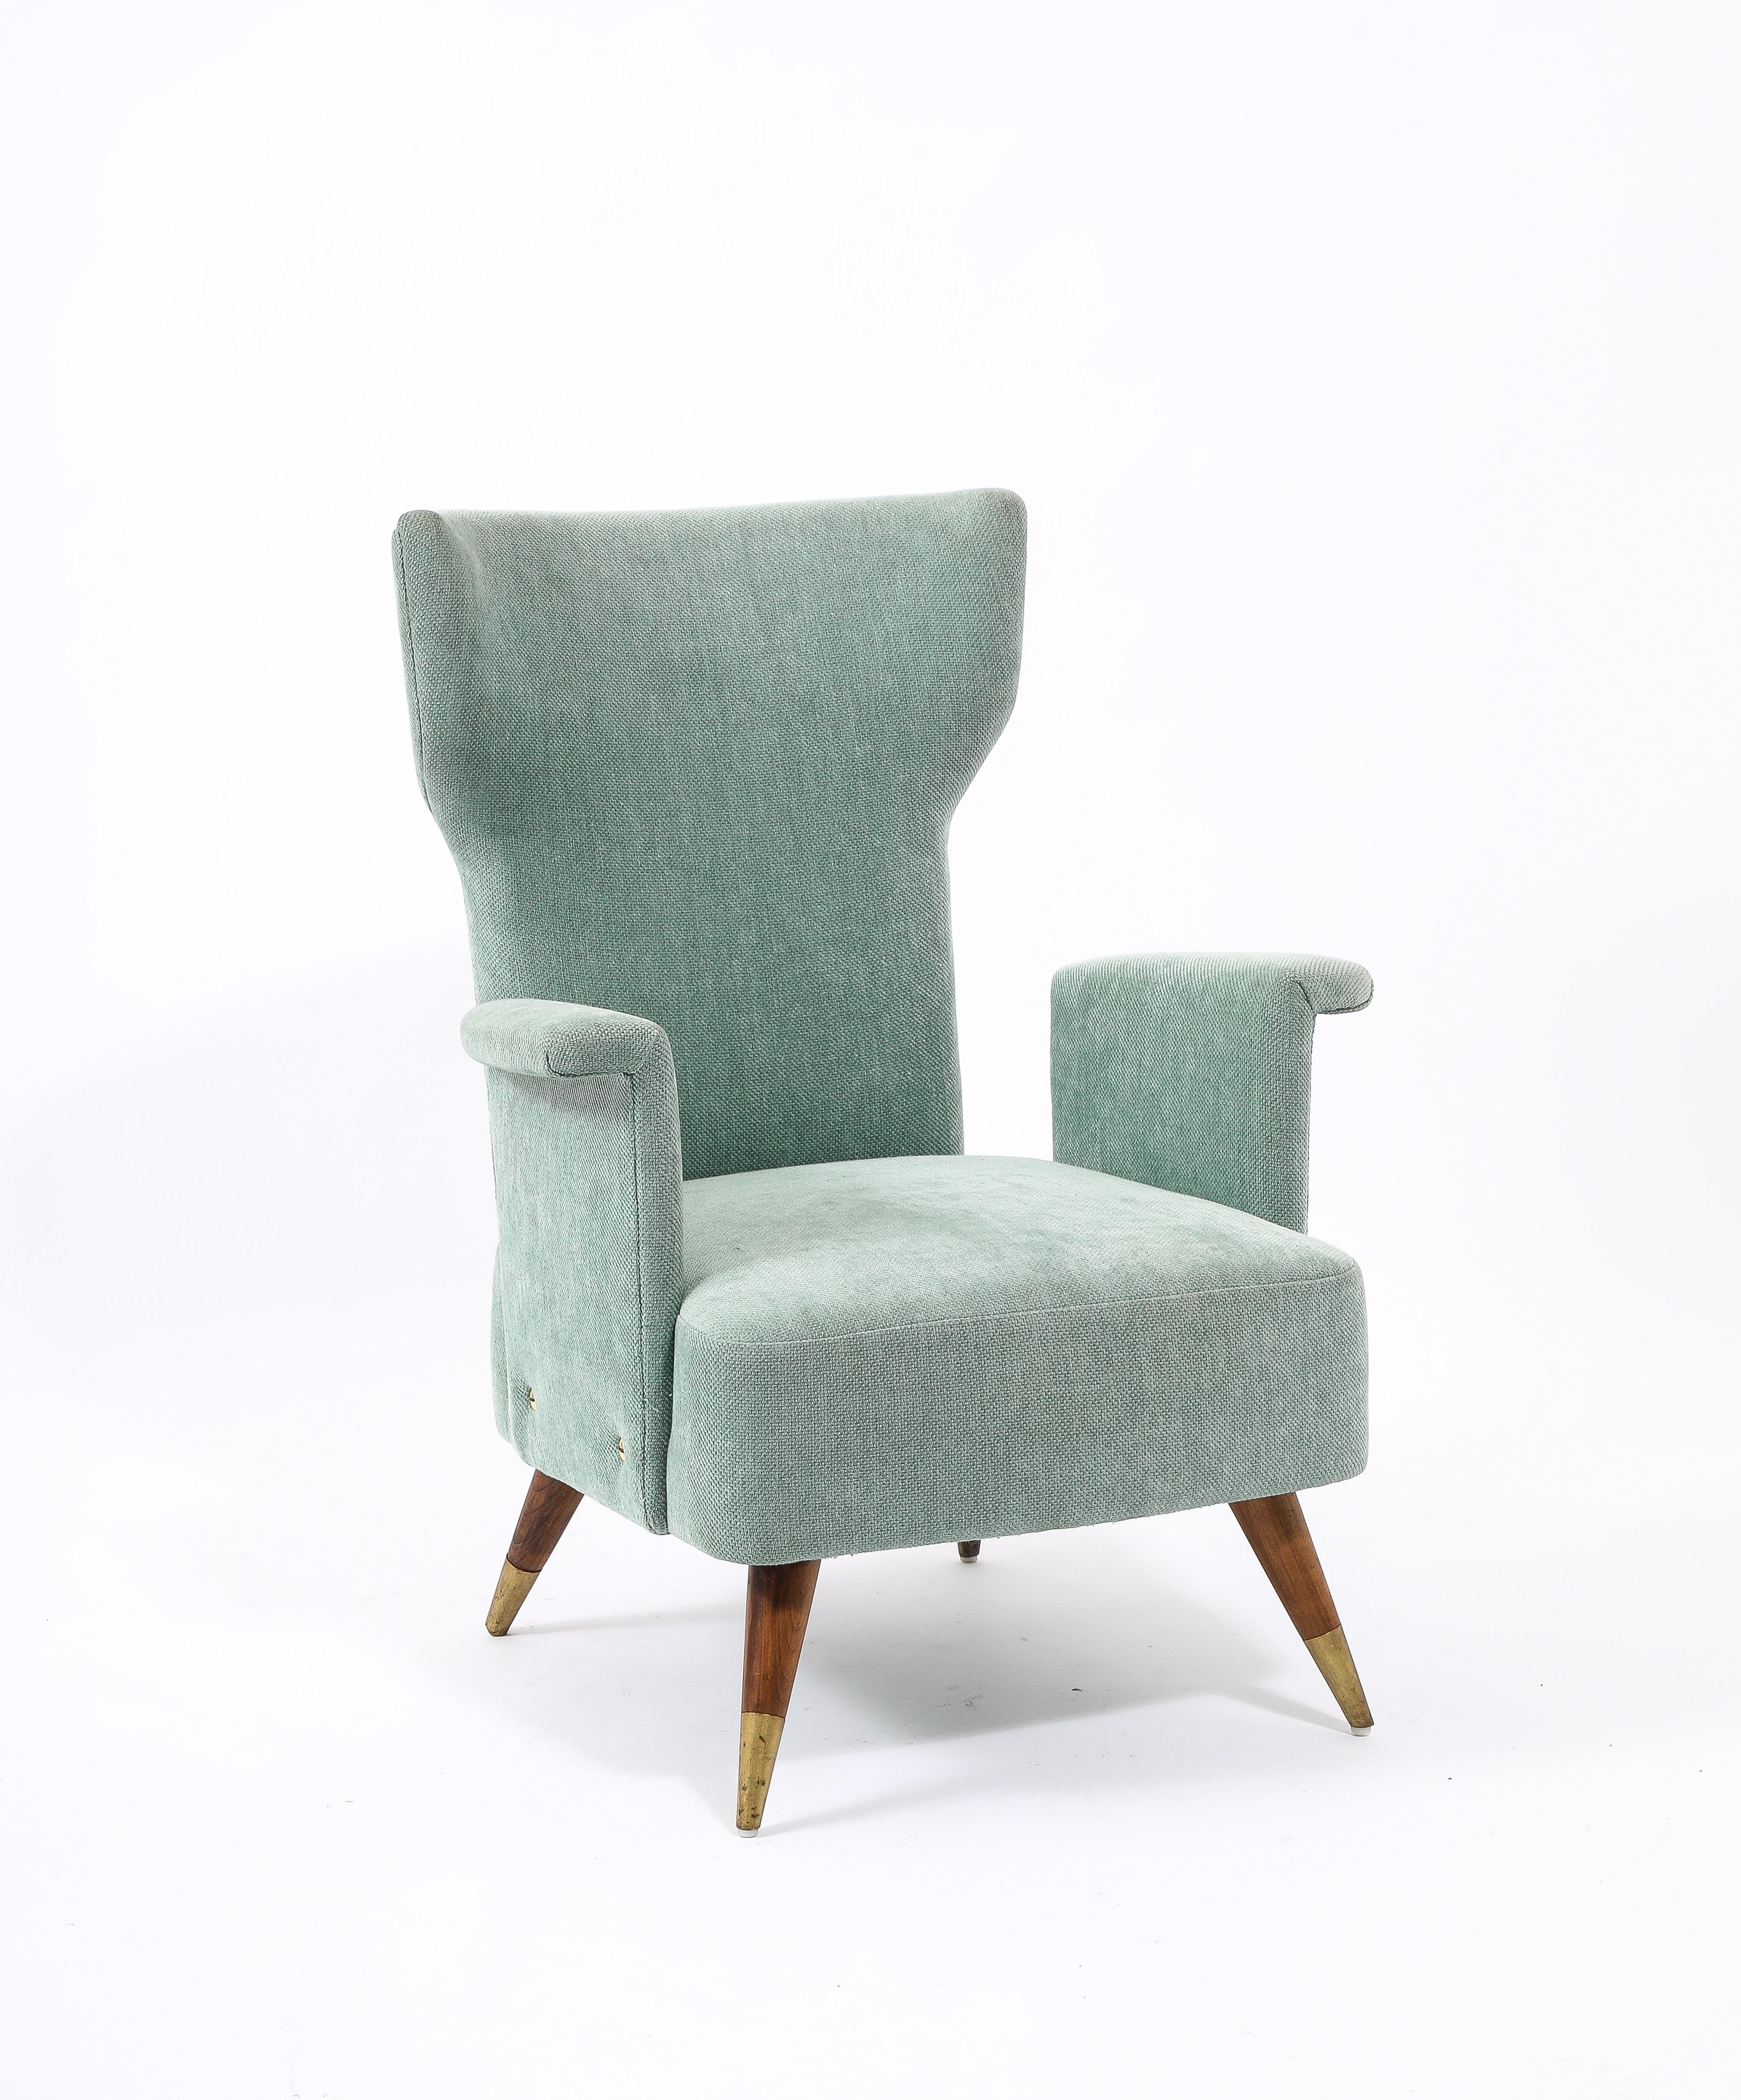 Pale Blue Tall Italian Wingchairs, Italy 1950's For Sale 4